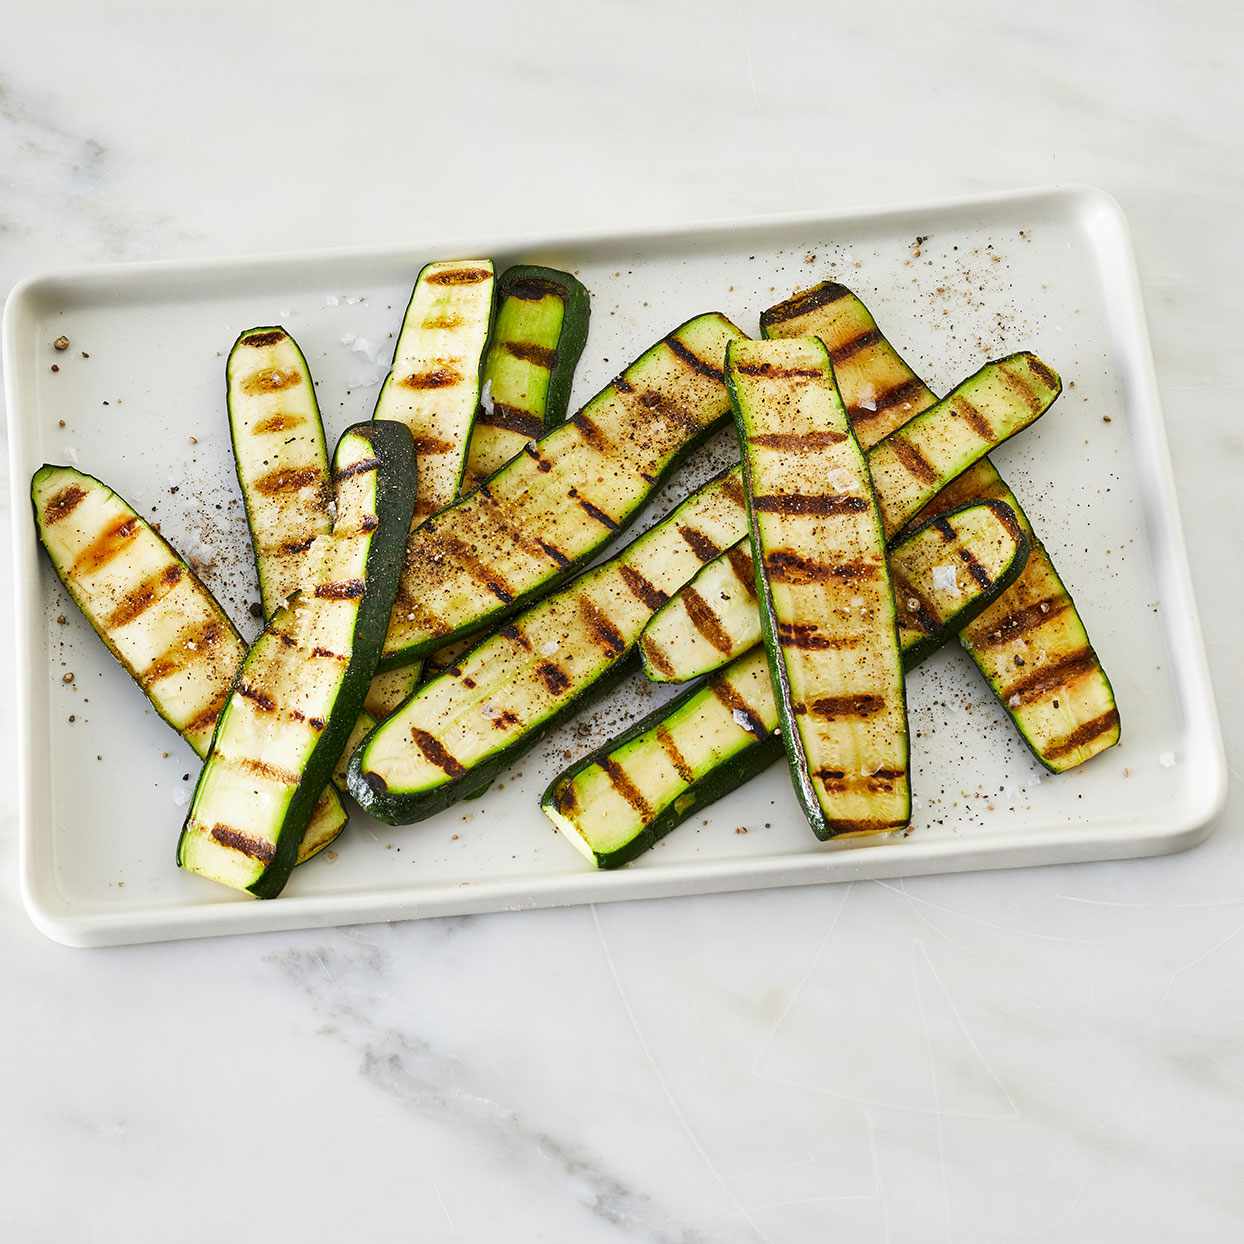 Plated-Grilled-zucchini